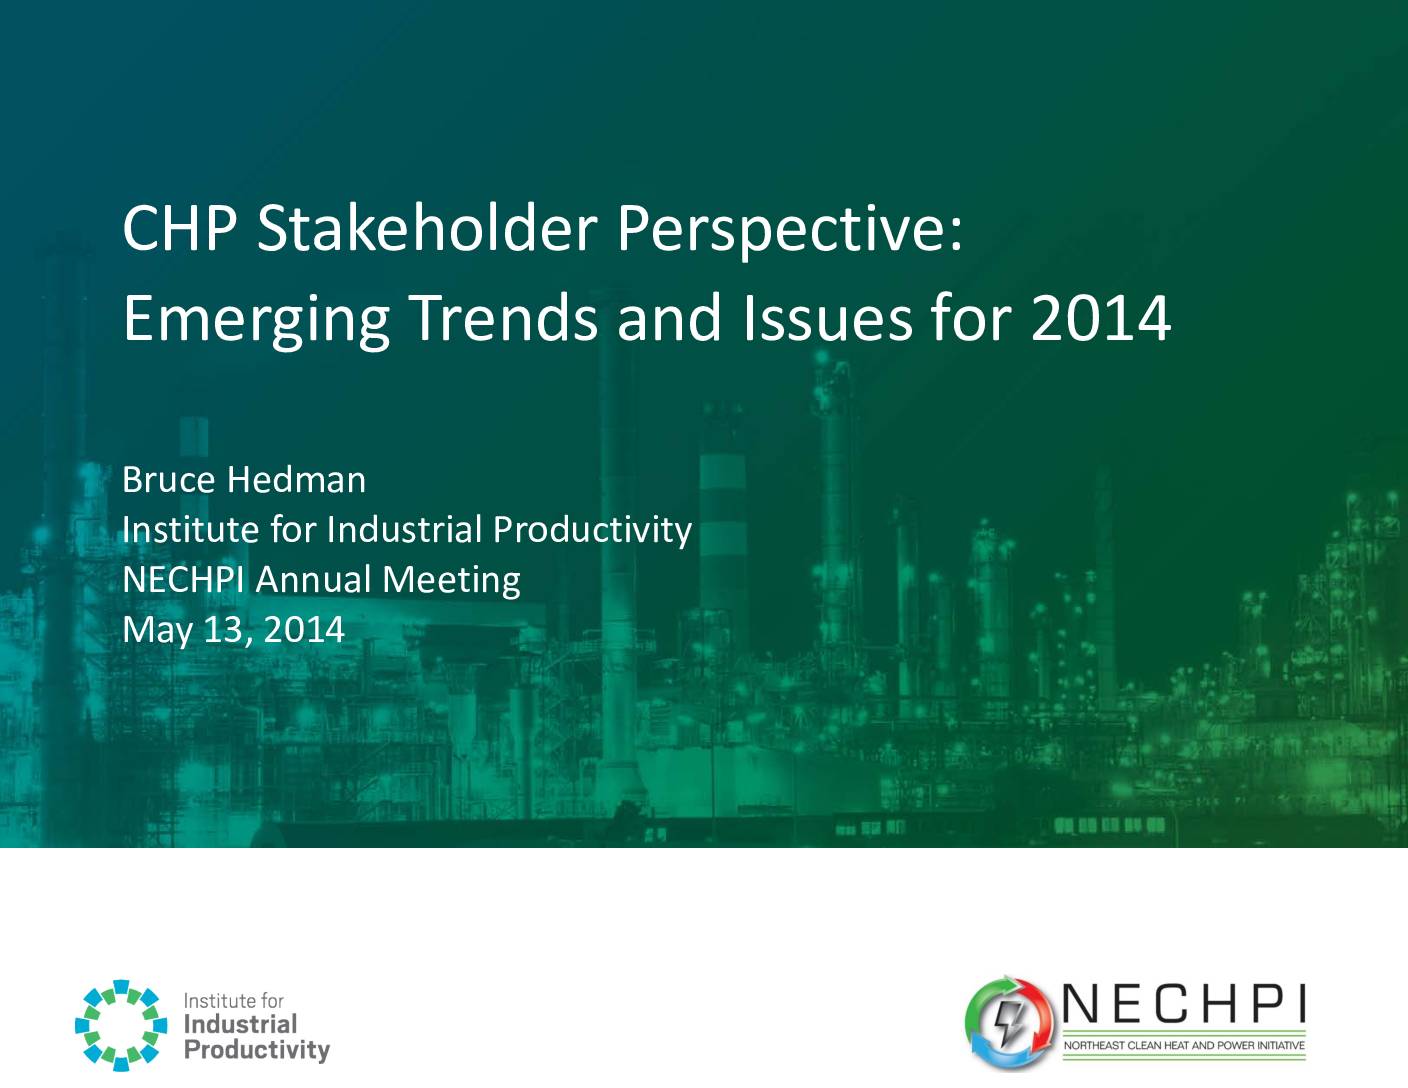 CHP Stakeholder Perspective: Emerging Trends and Issues for 2014